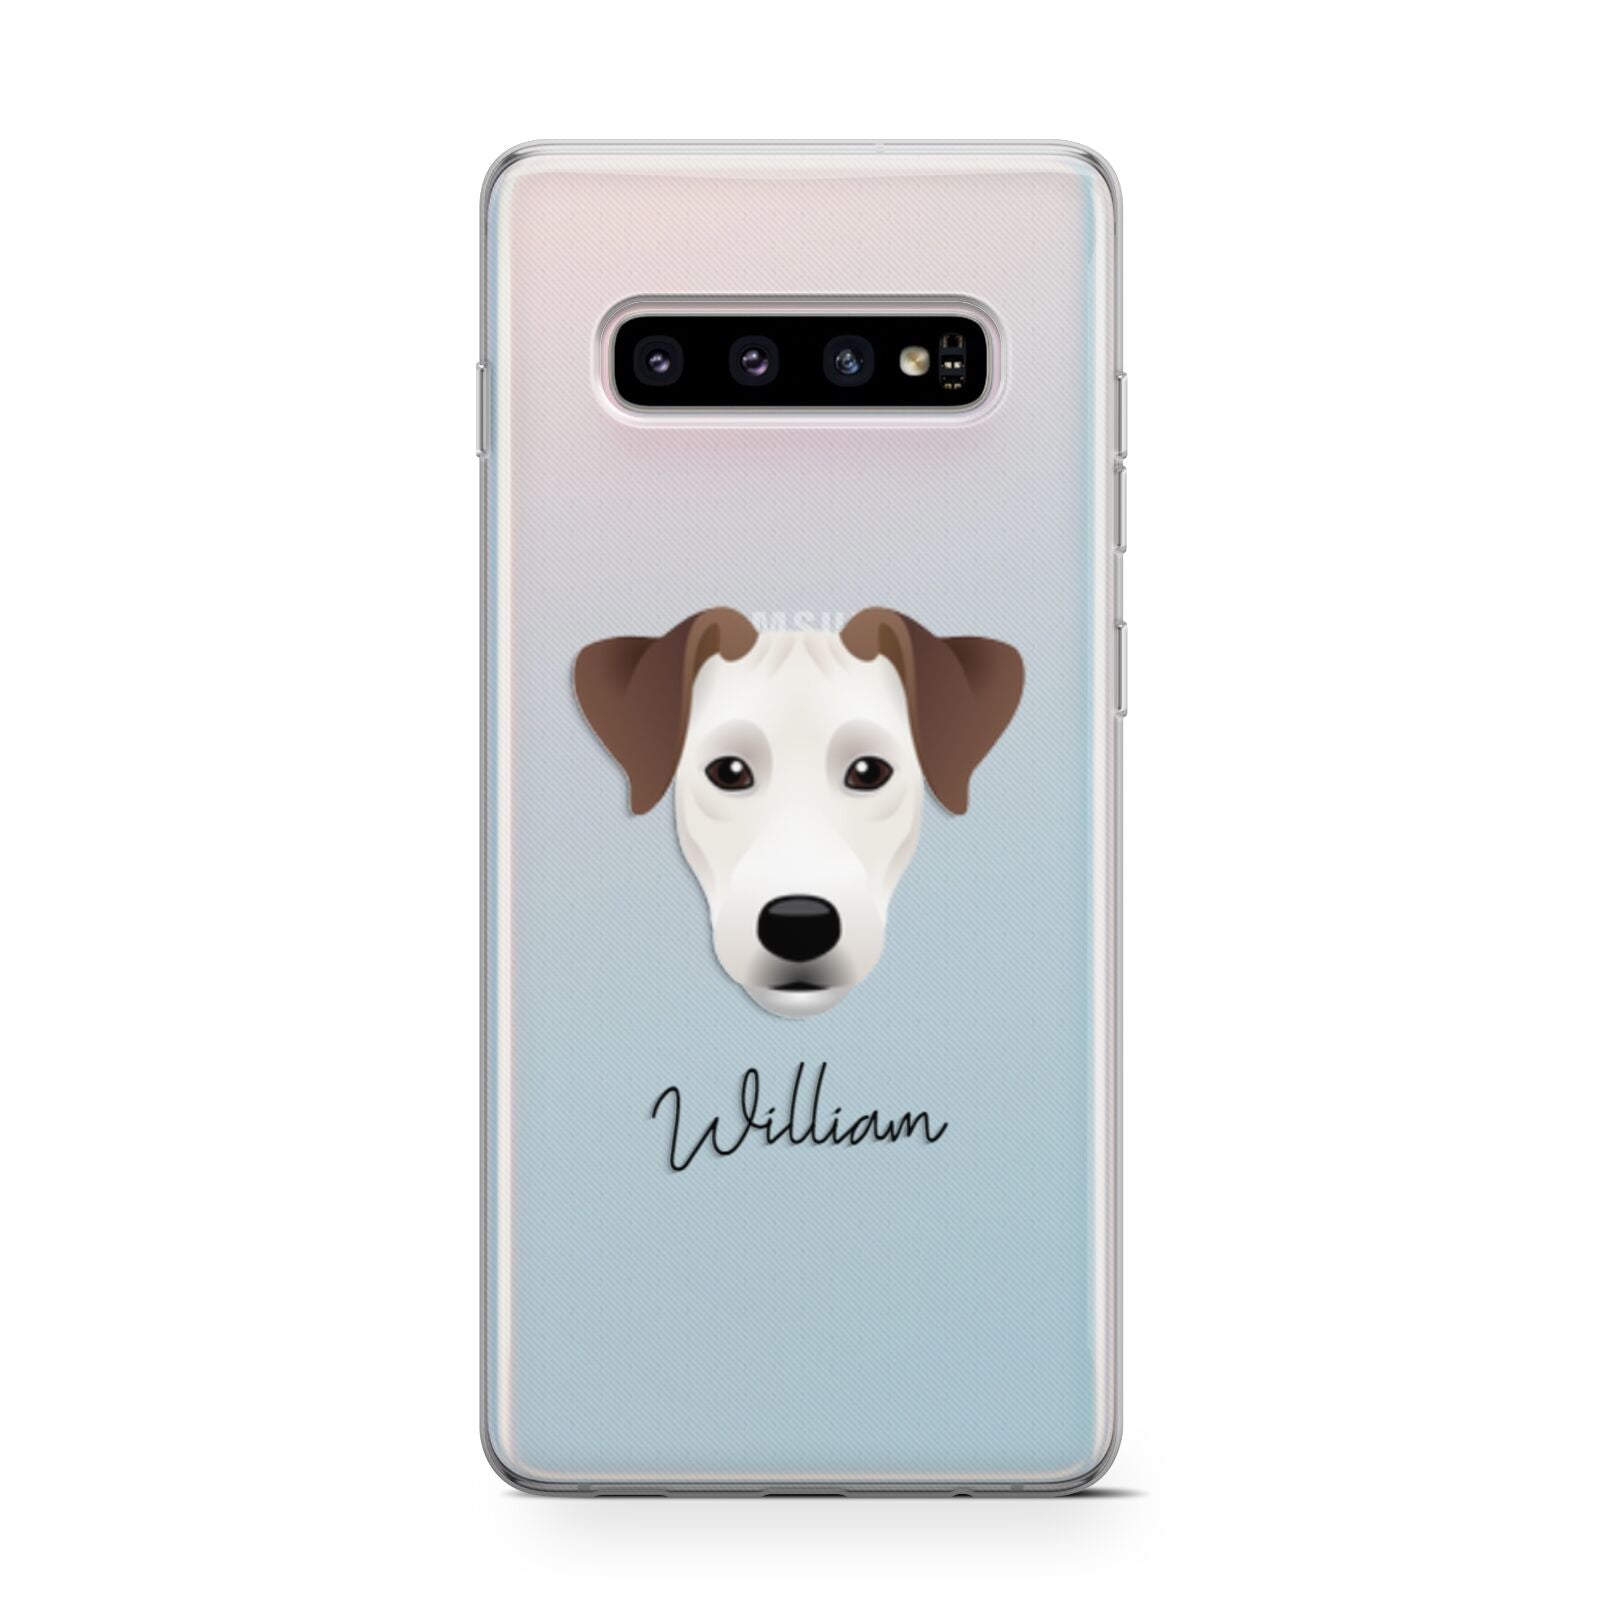 Parson Russell Terrier Personalised Samsung Galaxy S10 Case